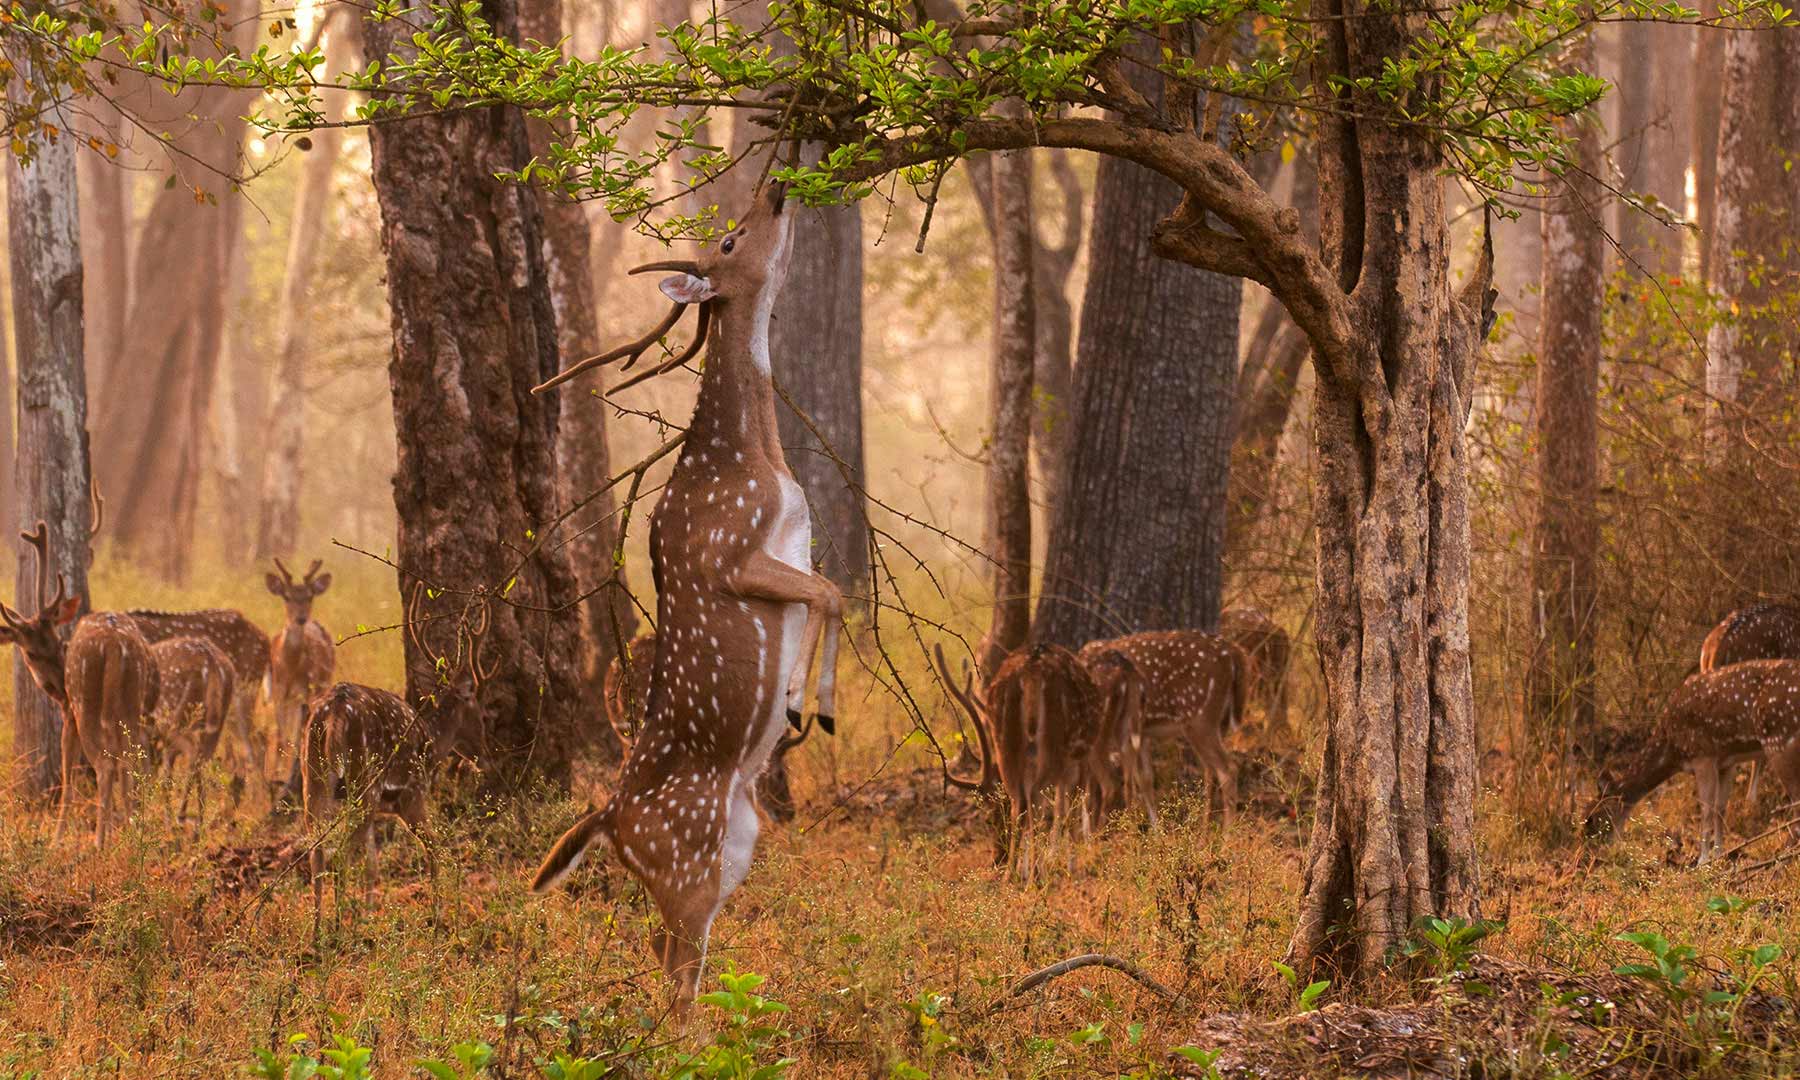 Pench National Park - Return to Nature